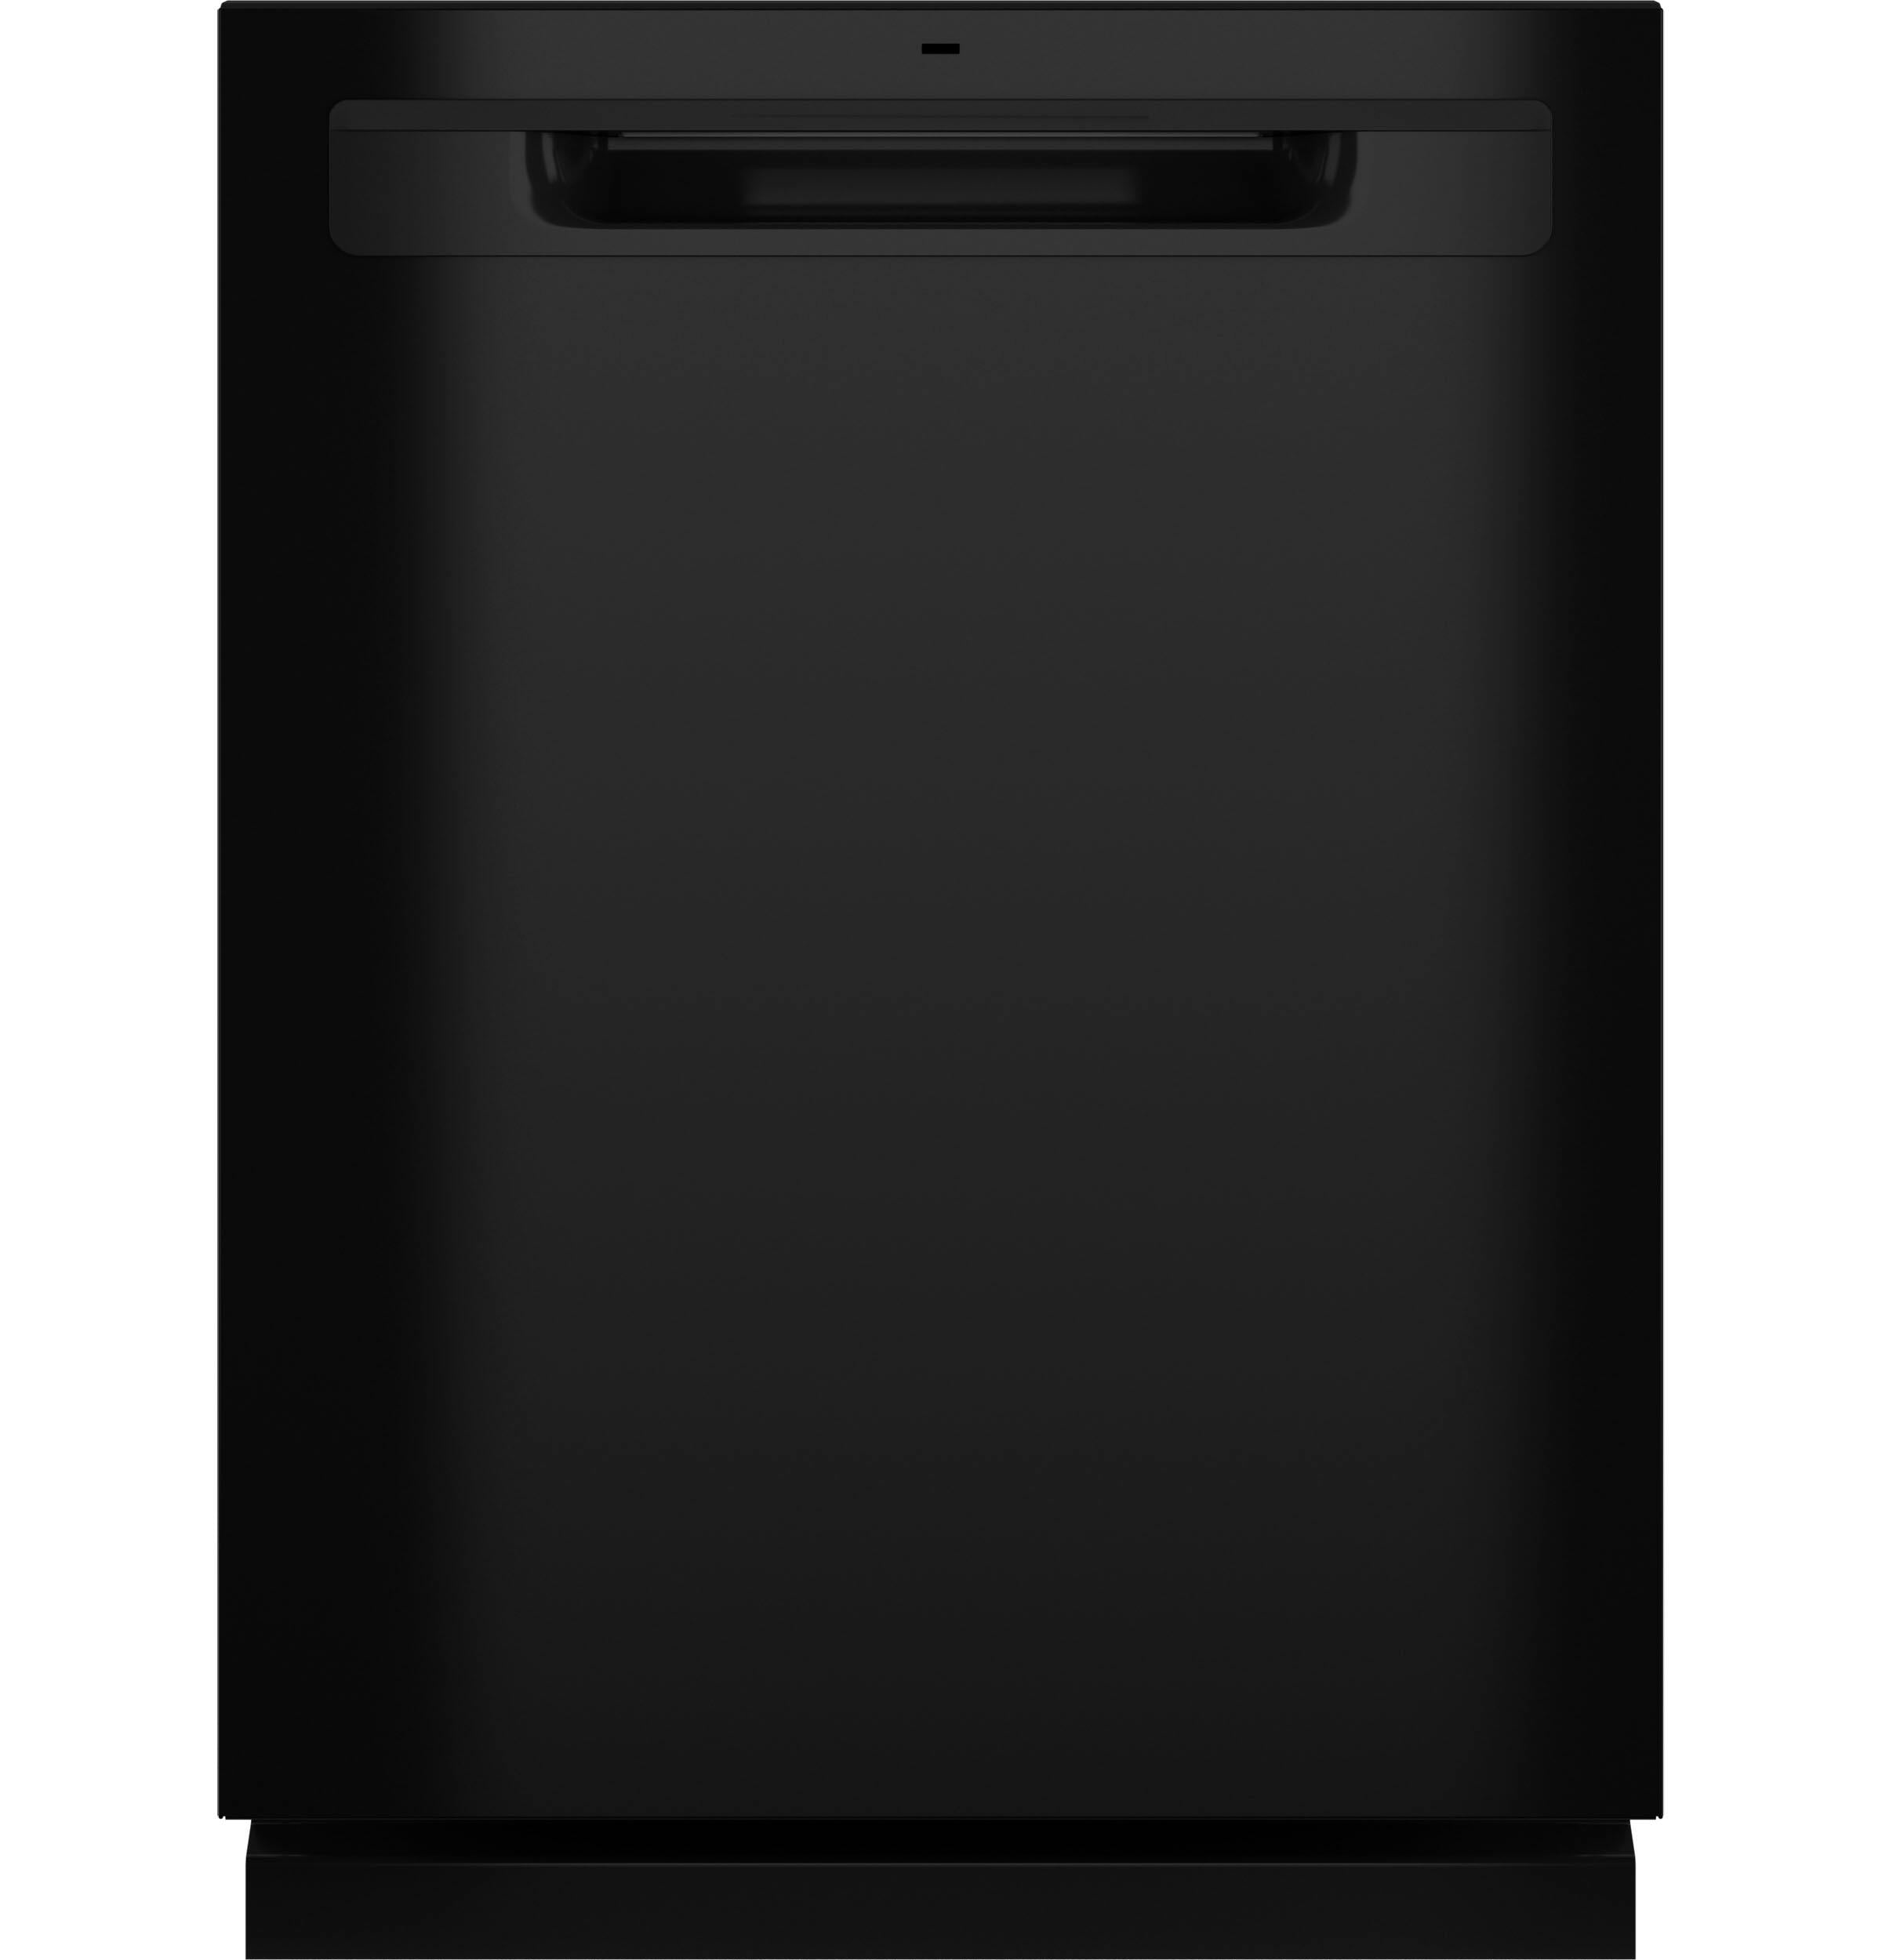 Ge Appliances GDP630PGRBB Ge® Top Control With Plastic Interior Dishwasher With Sanitize Cycle & Dry Boost